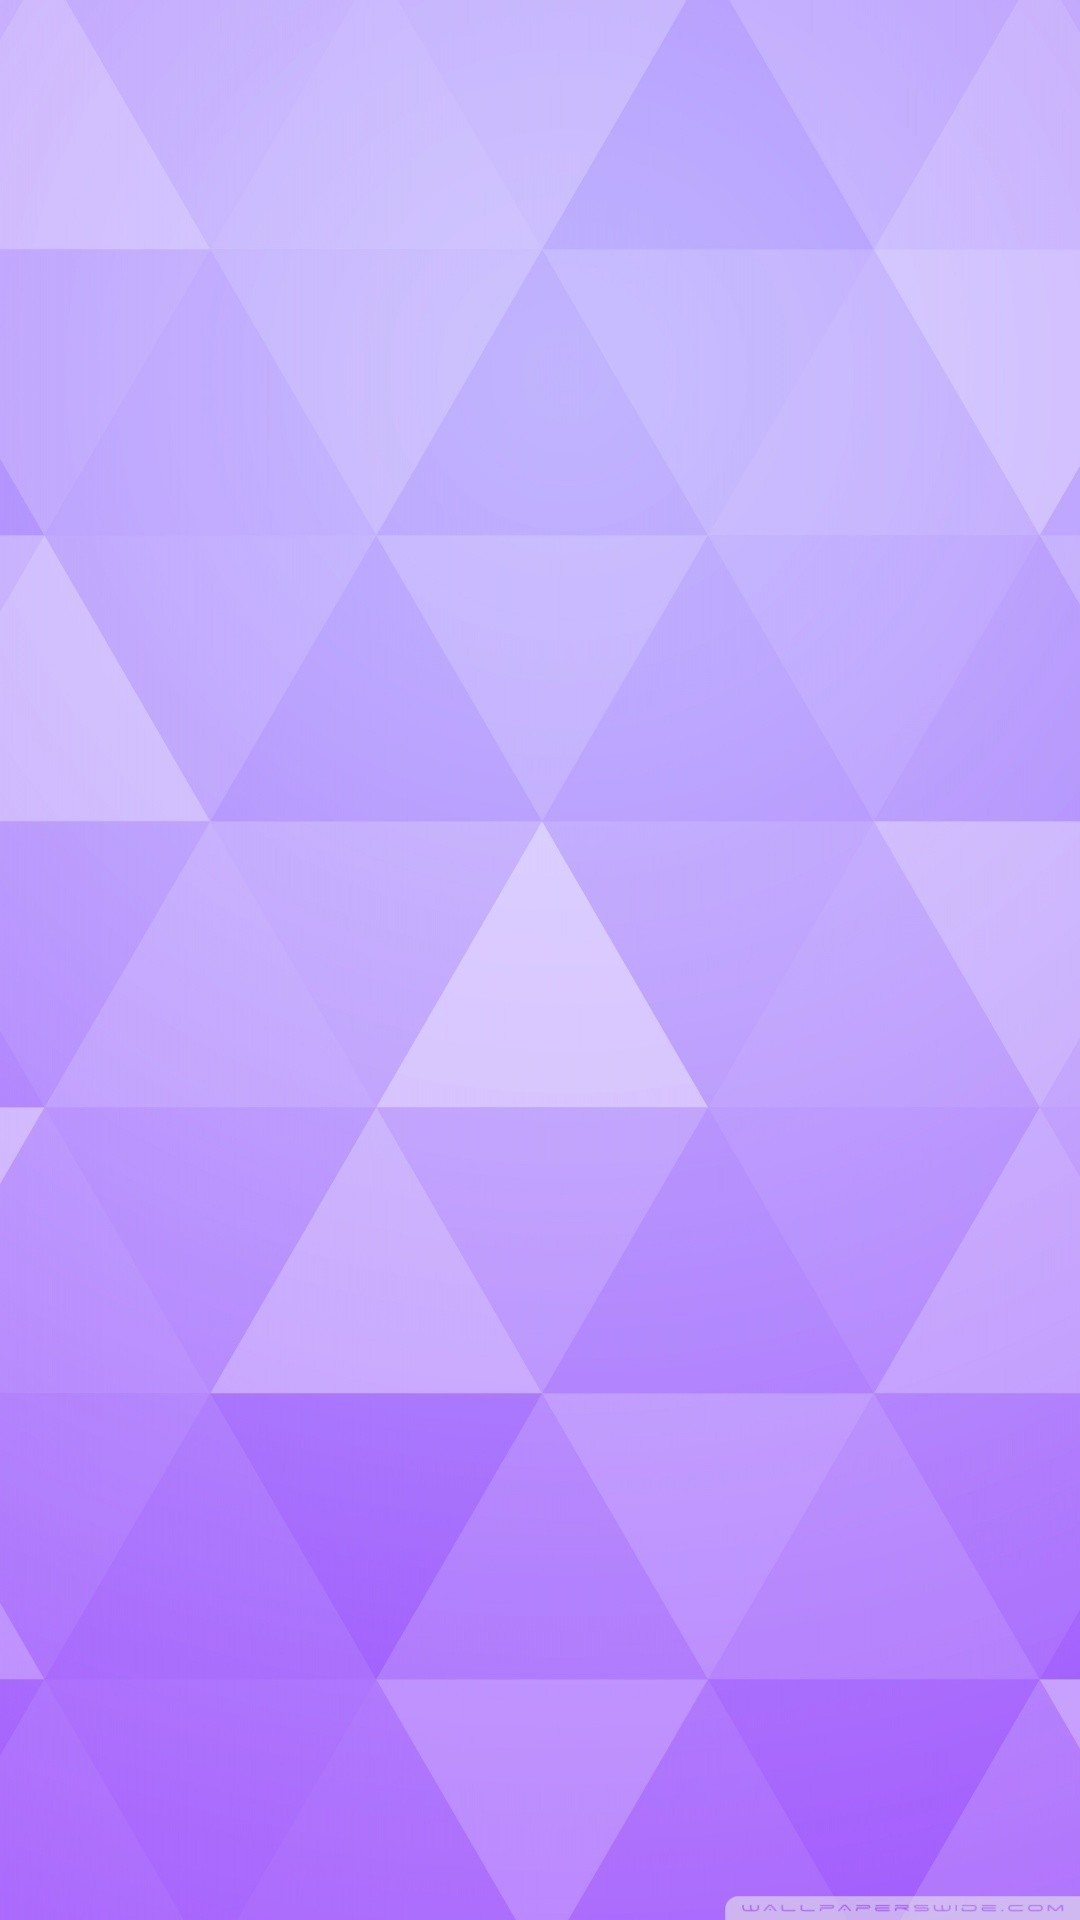 1080x1920 Free Violet Abstract Geometric Triangle Background phone wallpaper by  austinj12